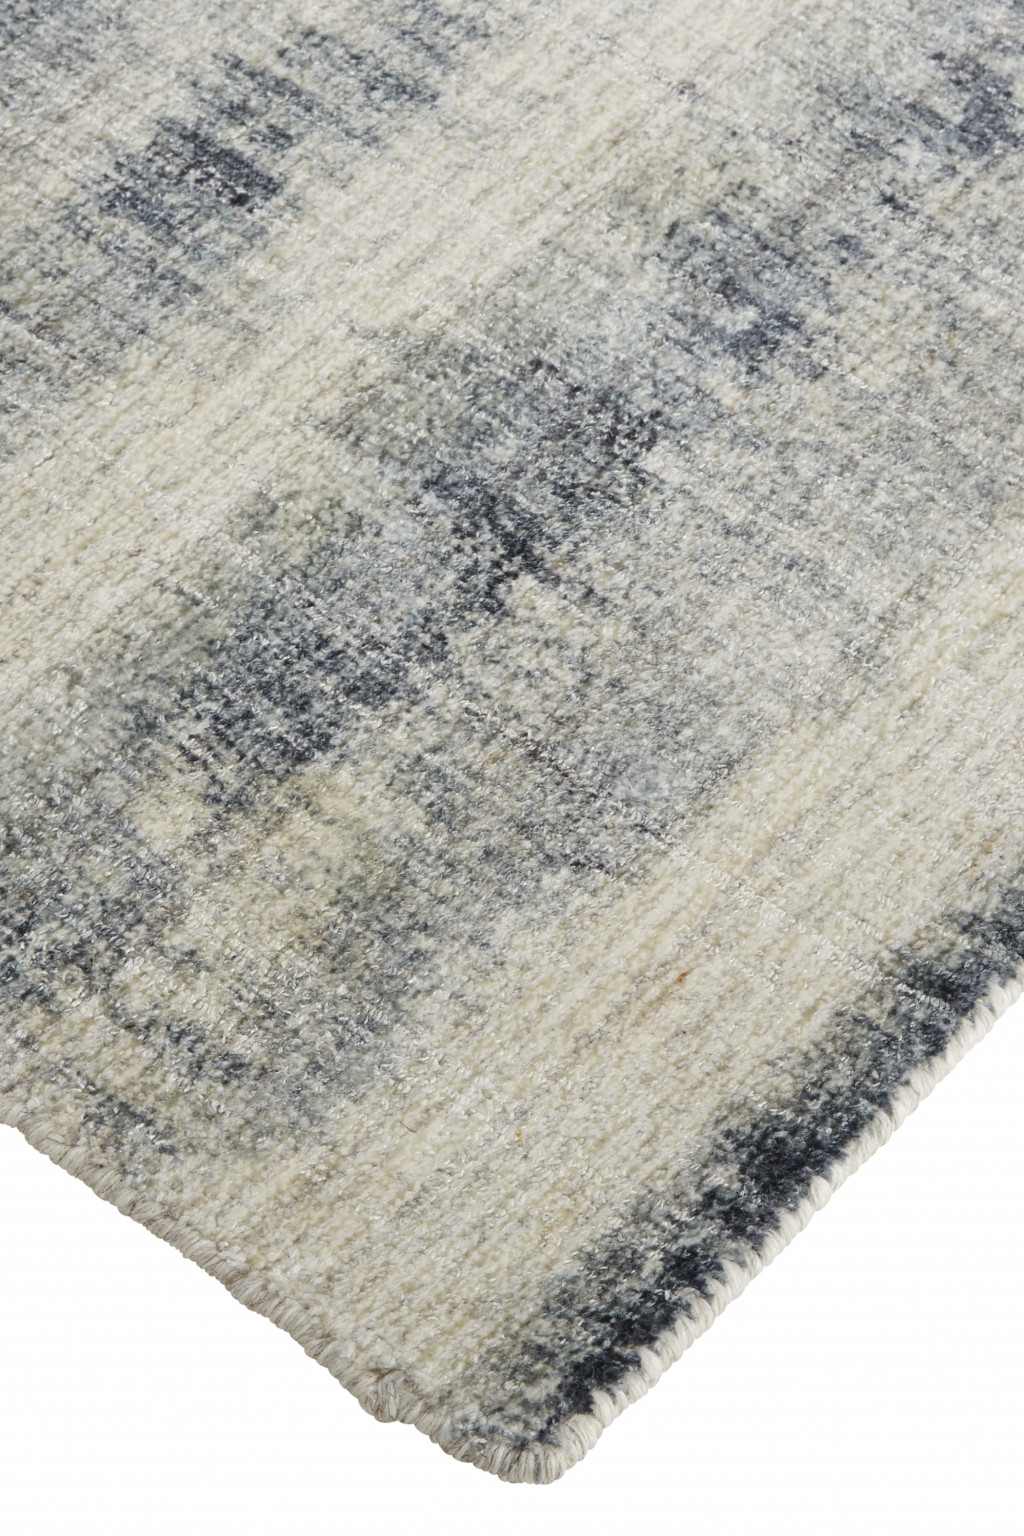 5' X 8' Ivory And Blue Abstract Hand Woven Area Rug-514450-5